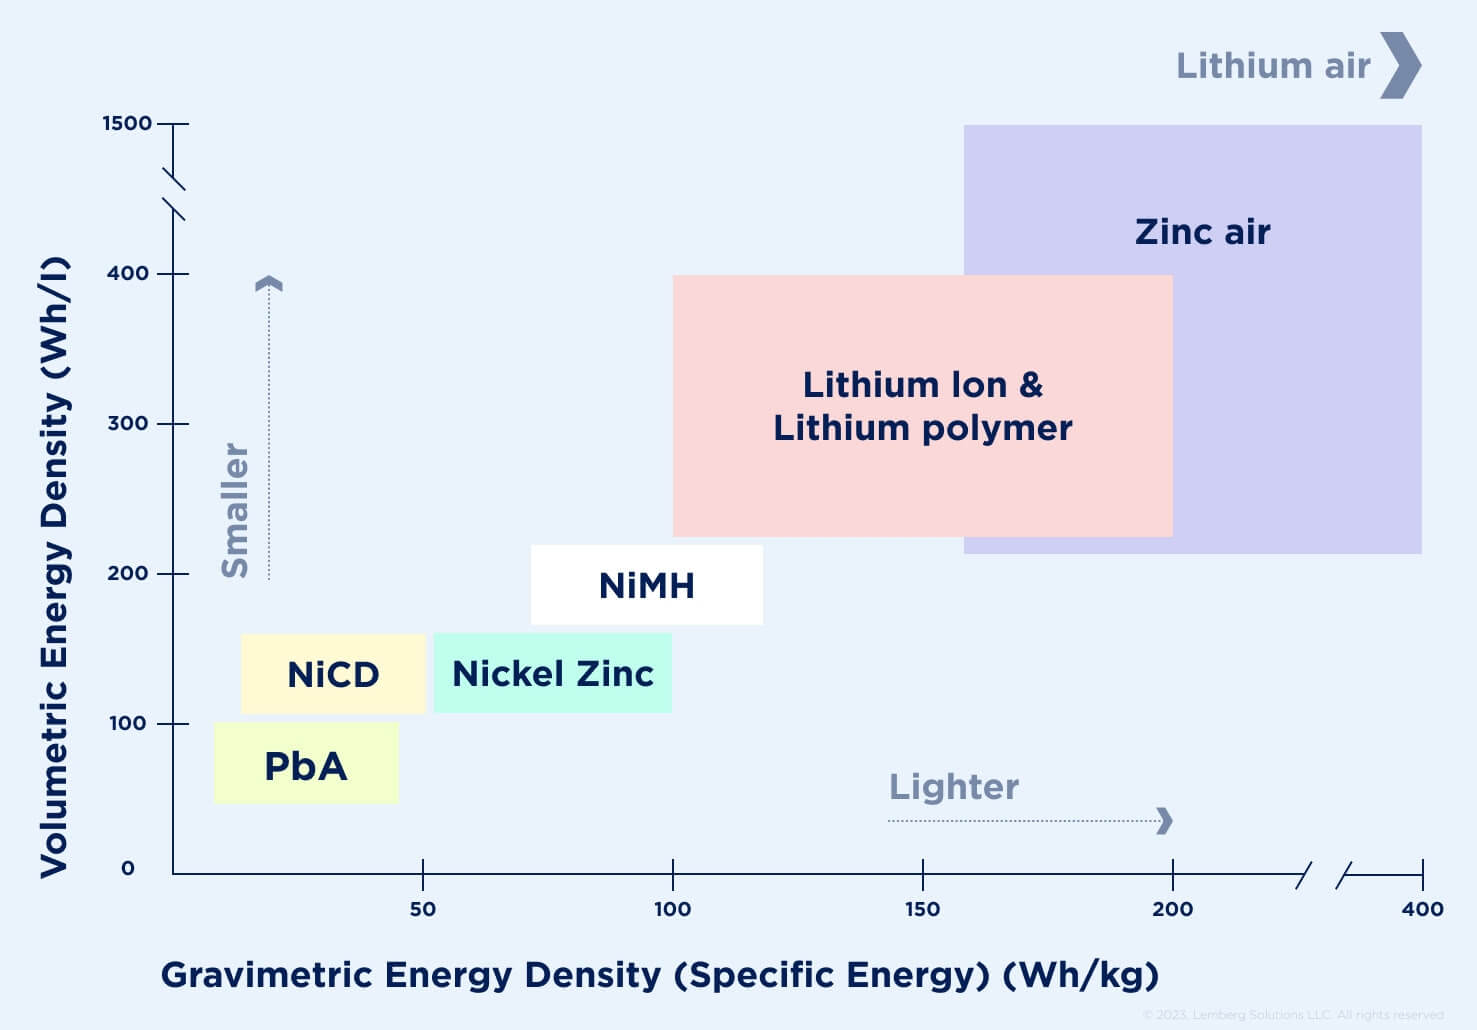 State of the Art in Li-ion Battery Technology - Specific energy and energy density for different cells - Lemberg Solutions